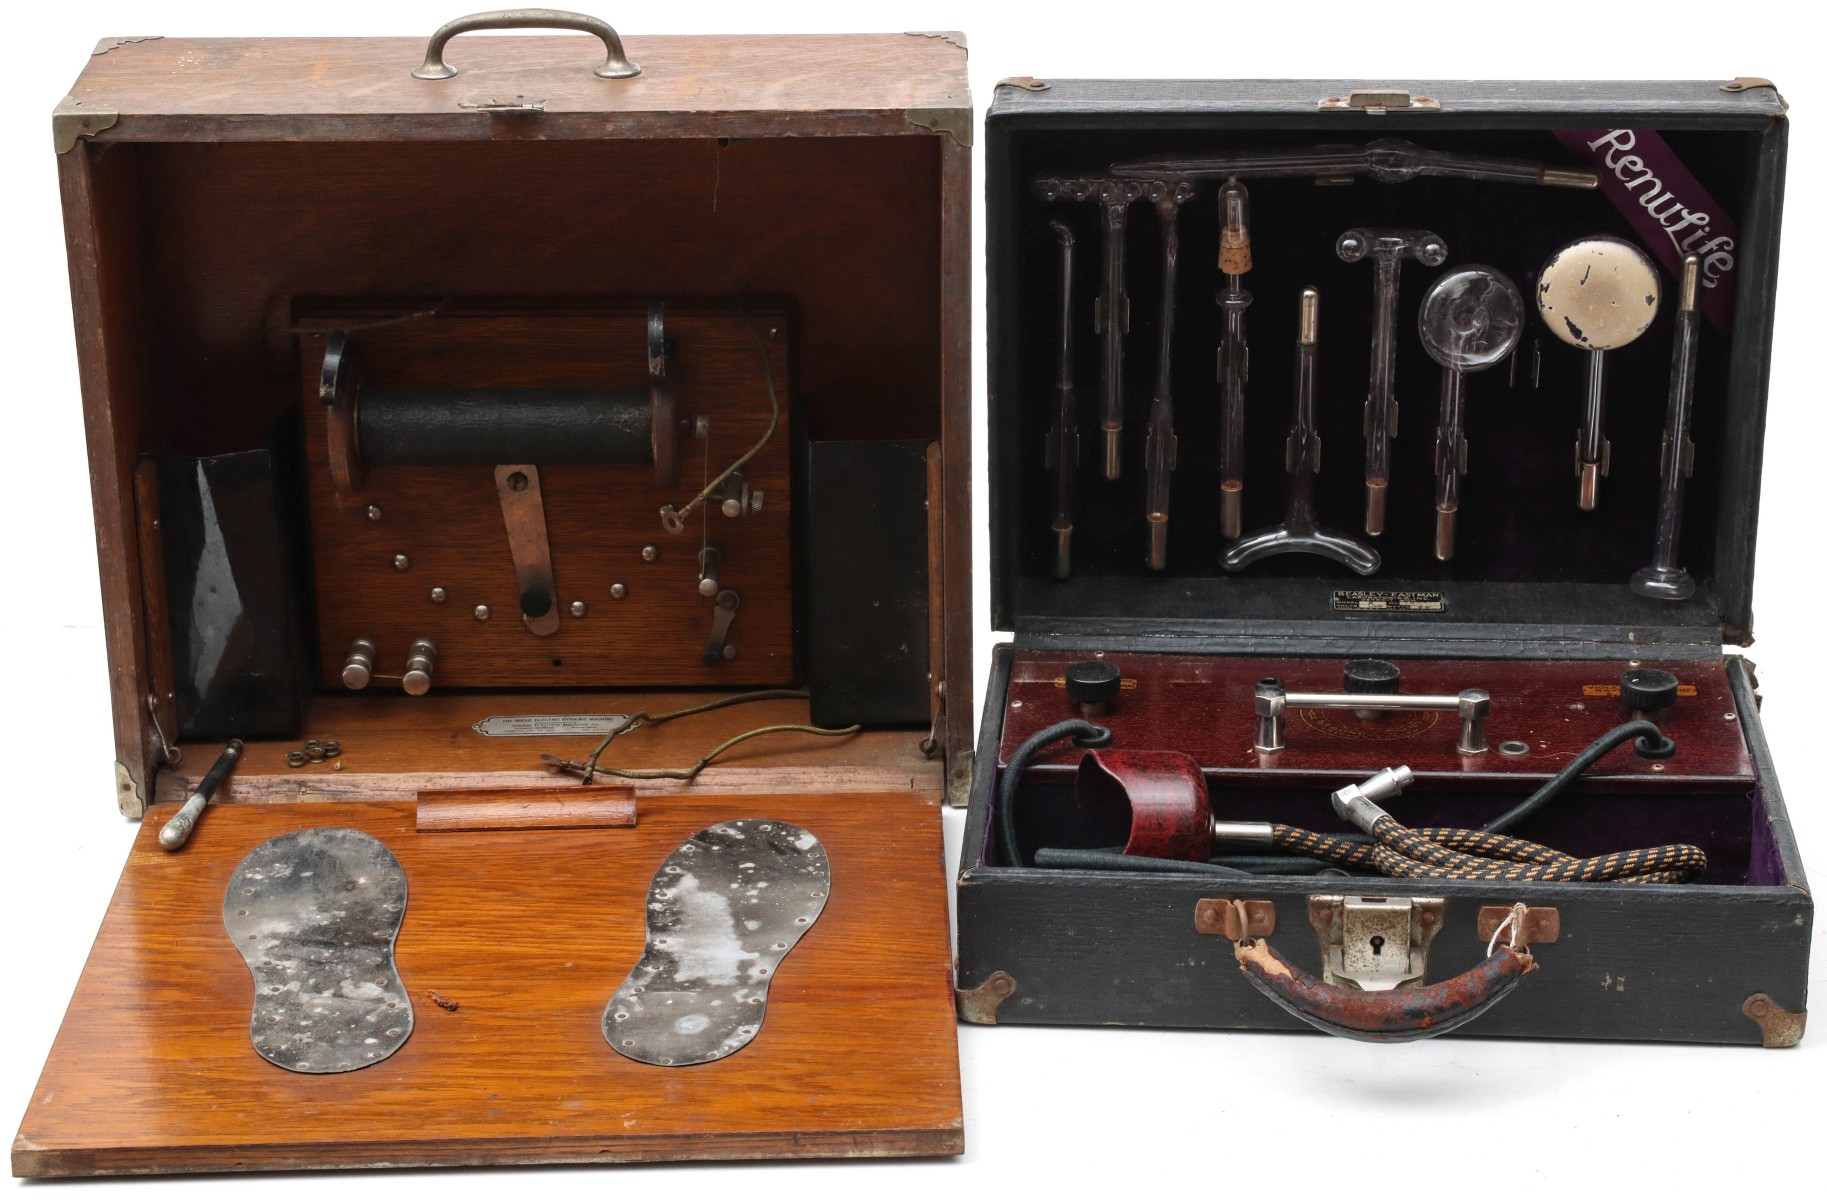 TWO ICONIC EARLY 20TH CENTURY QUACK MEDICAL DEVICES